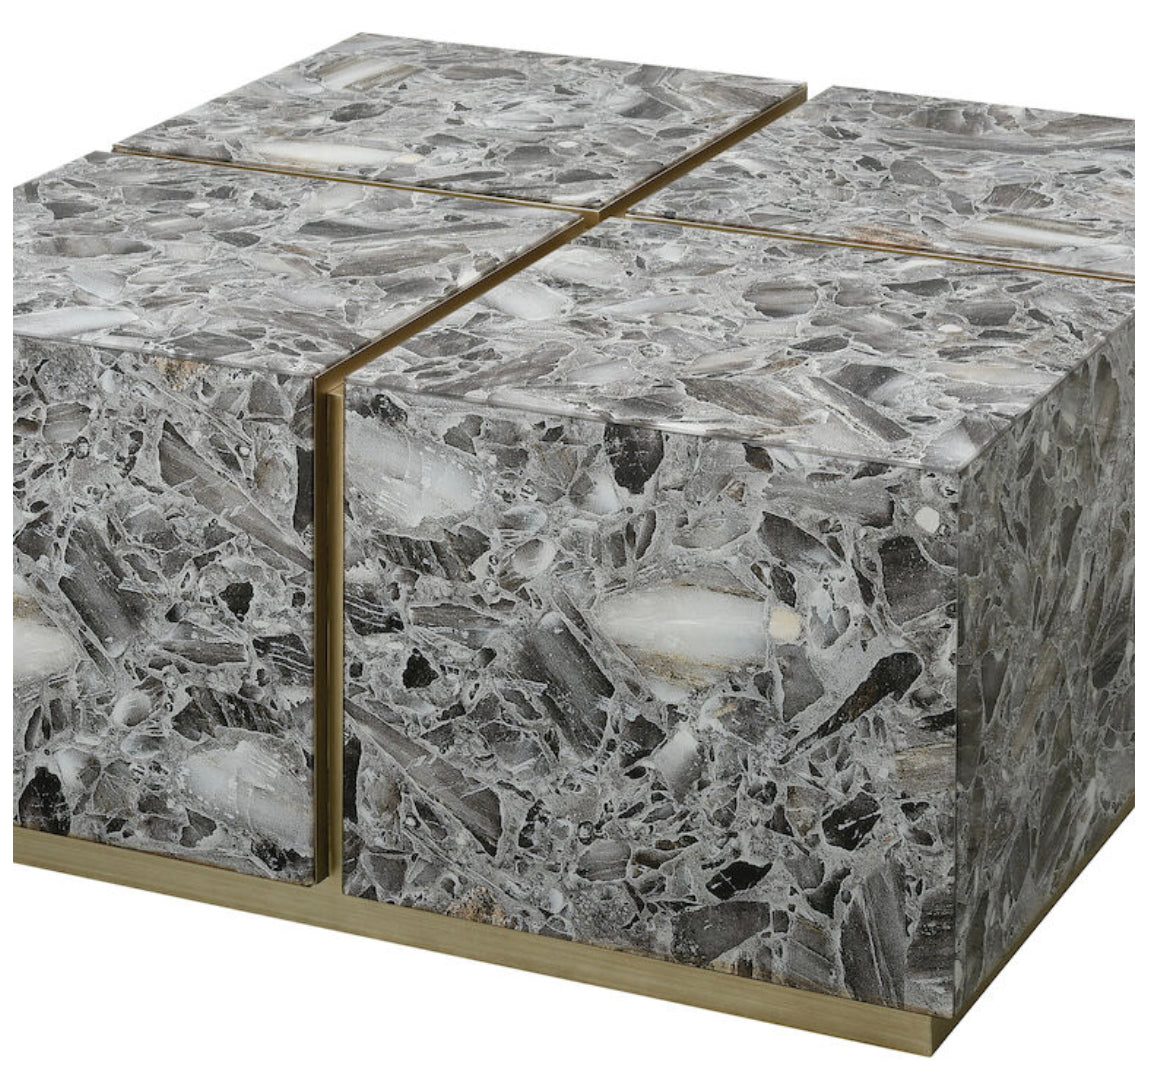 The Crystalline Coffee Table makes a sculptural statement. Featuring four squares of black agate, which are joined by a recessed frame of silver leaf metal, this table is glamorous and chic.  Primary Color/FinishGray Agate Primary MaterialGlass Secondary MaterialWood Composite Secondary Material Sub StyleMDF Item Width32.75 Item Depth32.75 Item Height16 Item Weight97.24